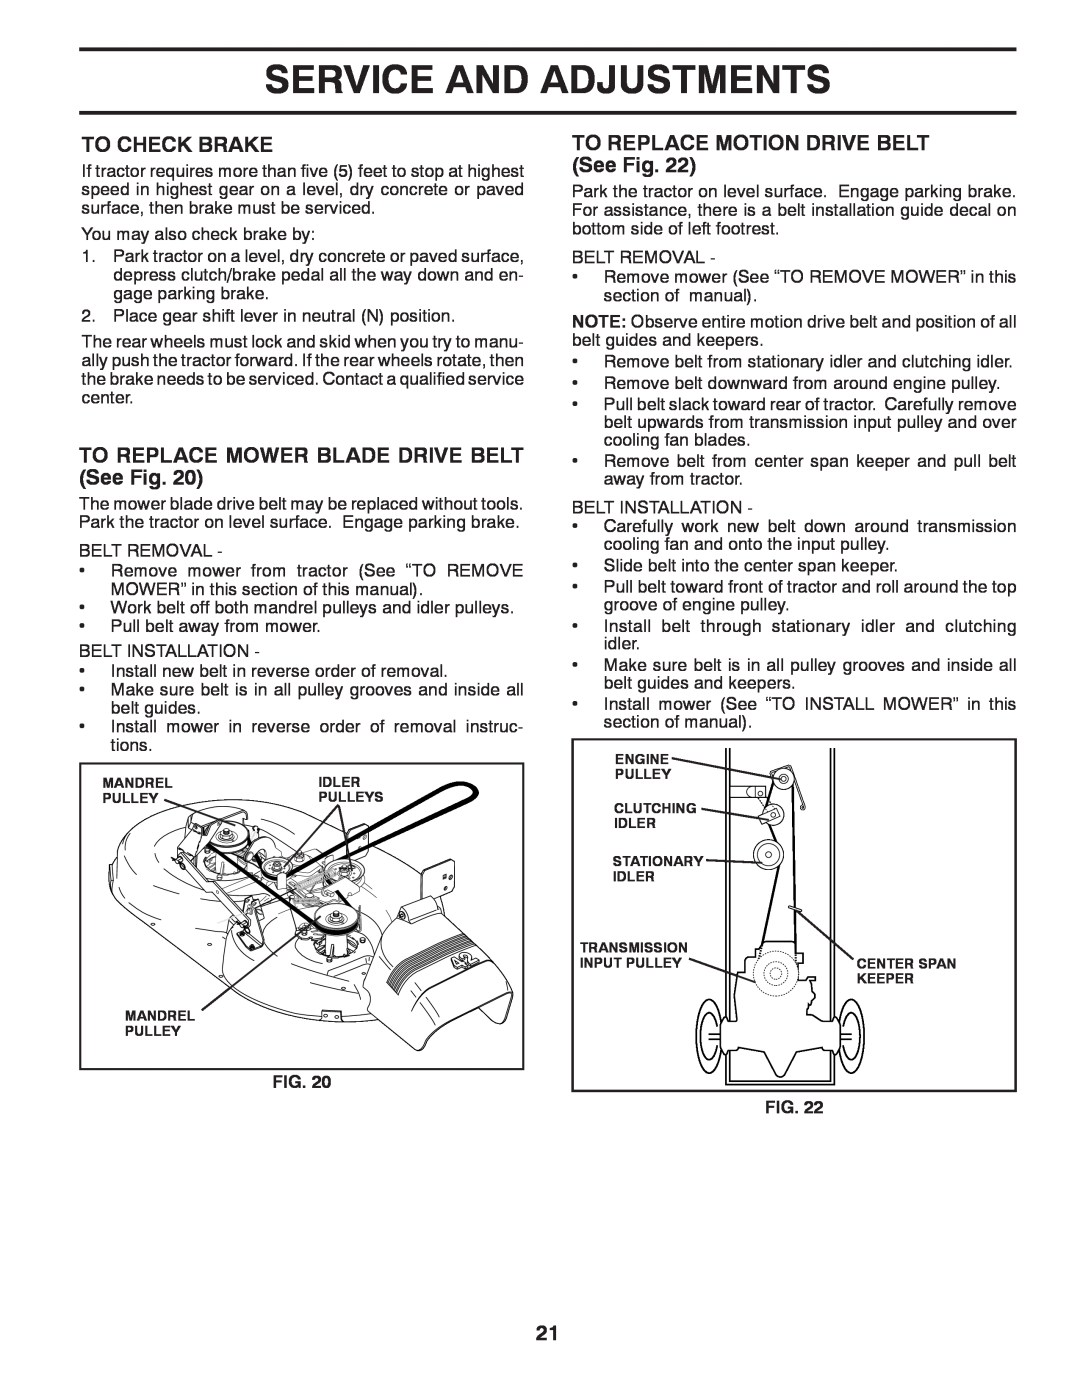 Poulan PBA19542LT manual To Check Brake, TO REPLACE MOWER BLADE DRIVE BELT See Fig, TO REPLACE MOTION DRIVE BELT See Fig 